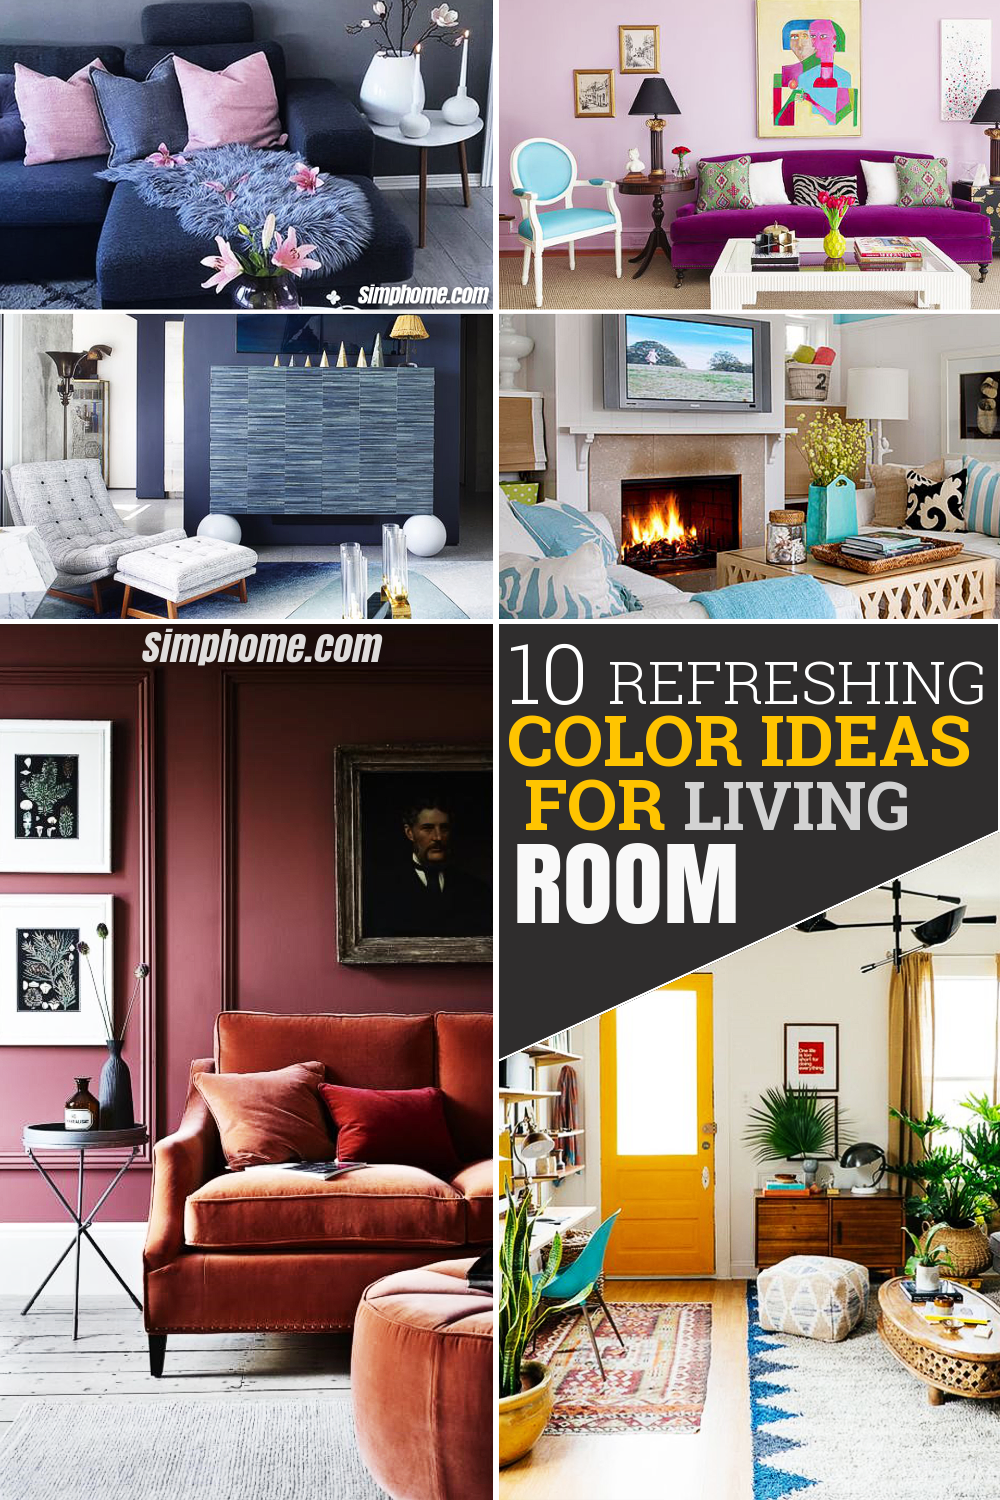 10 Refreshing Color Ideas for Living Room via Simphome Featured Pinterest